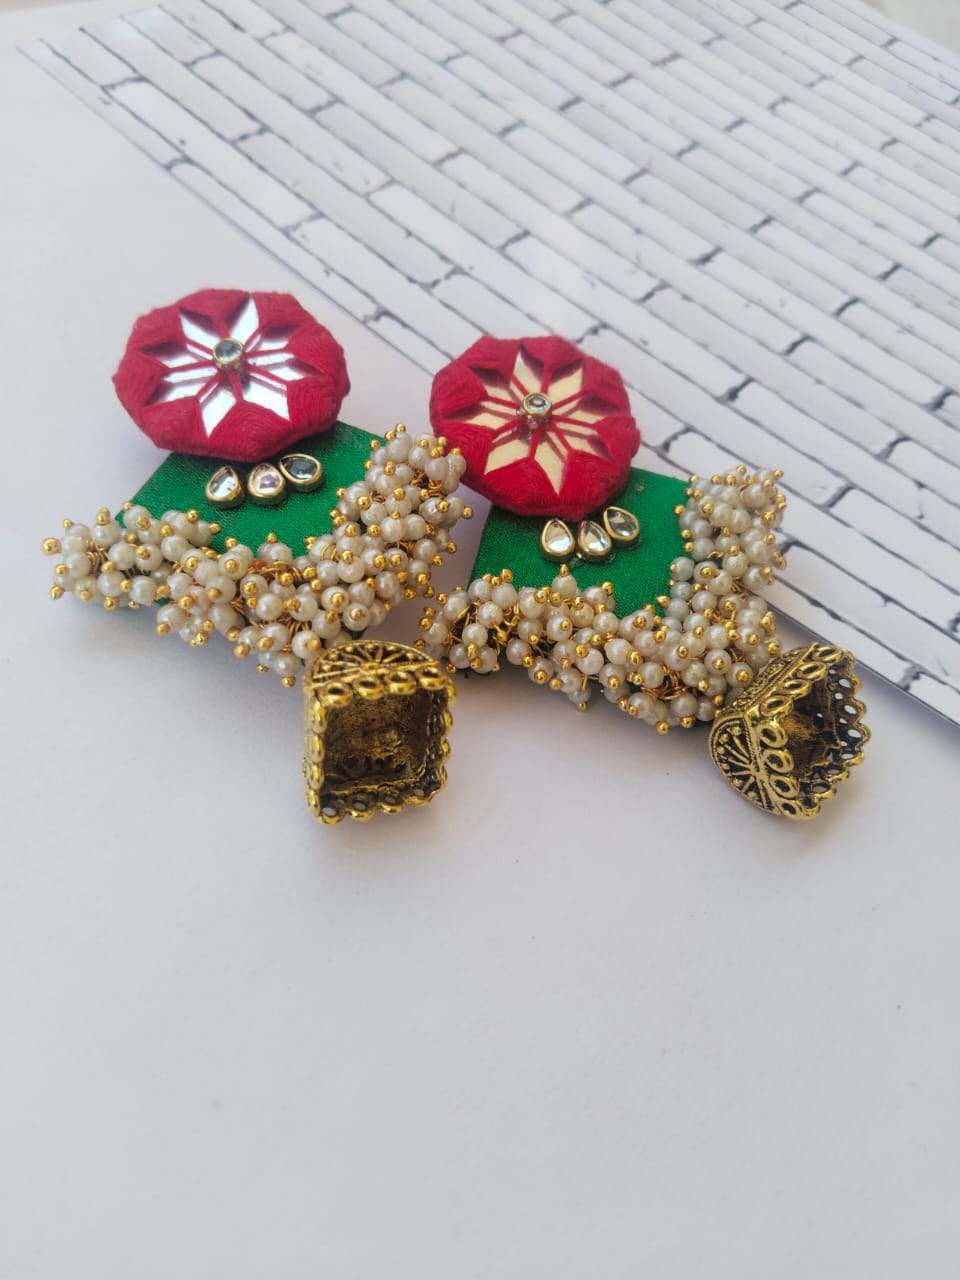 Red and green earrings with mirror work, white beads and golden bottom on white backdrop